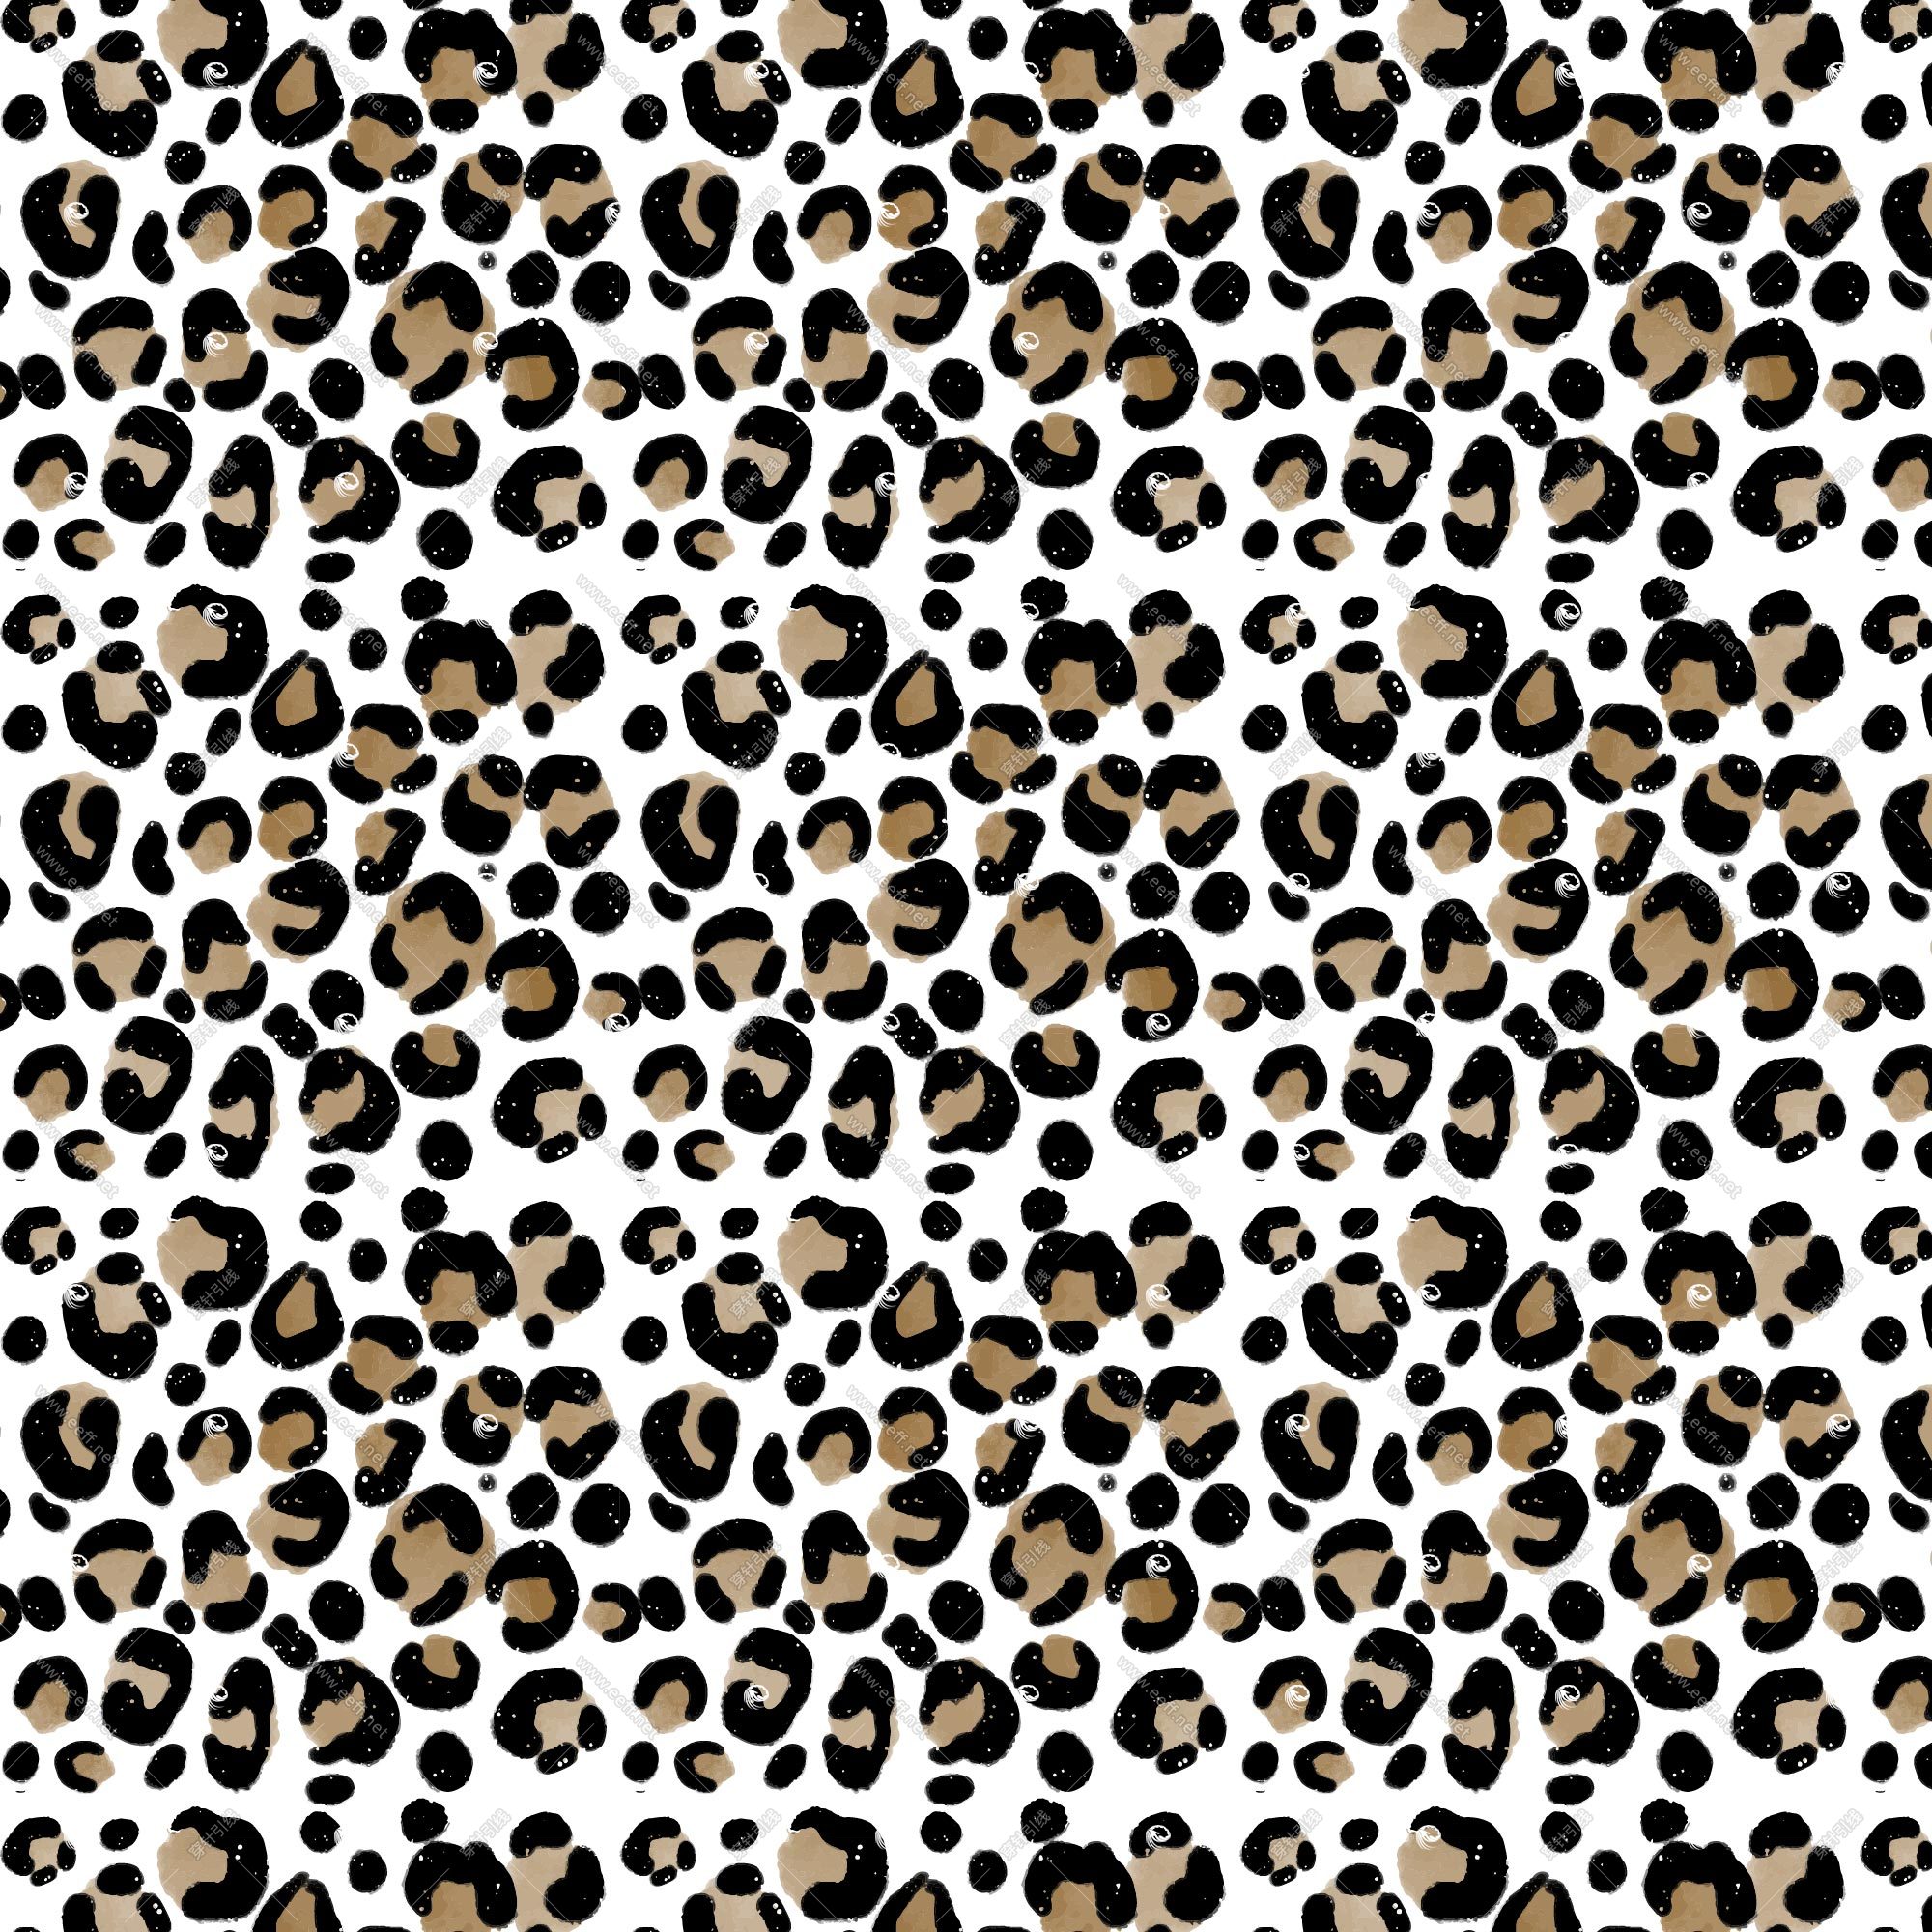 abstract_background_with_watercolour_animal_print_pattern_0402-1